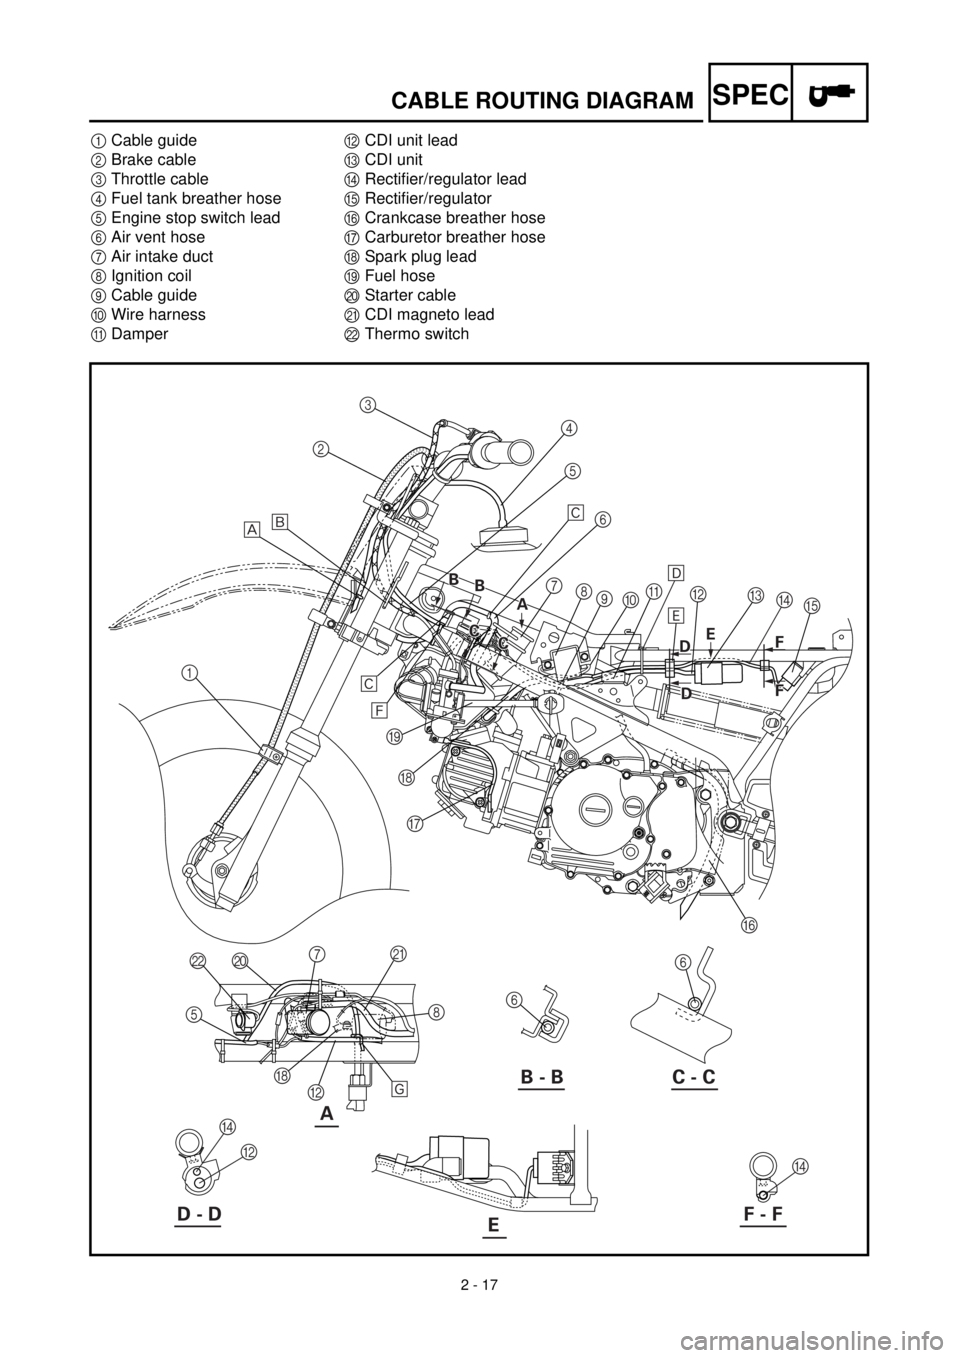 YAMAHA TTR90 2002  Owners Manual 2 - 17
SPECCABLE ROUTING DIAGRAM
1Cable guide
2Brake cable
3Throttle cable
4Fuel tank breather hose
5Engine stop switch lead
6Air vent hose
7Air intake duct
8Ignition coil
9Cable guide
0Wire harness
A